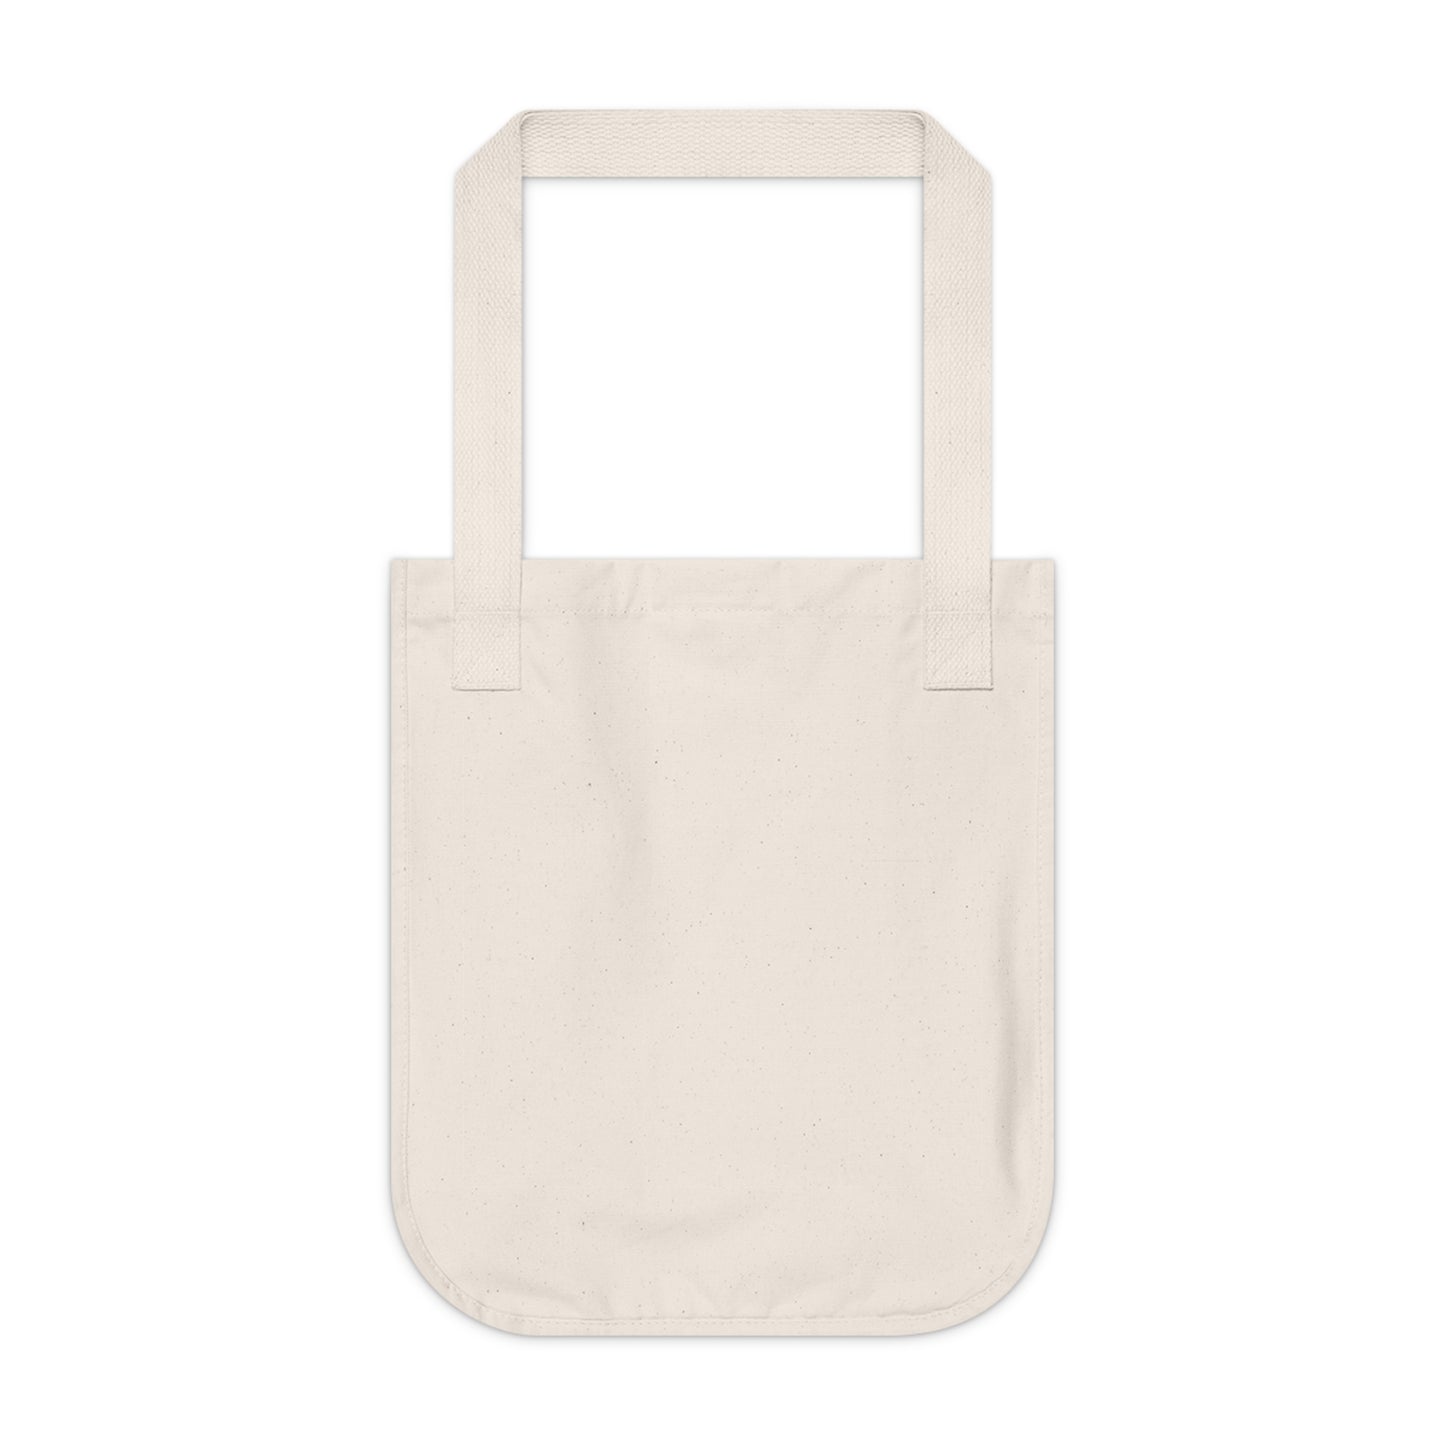 "An Eco-Conscious Collage: Crafting a Tale of Sustainability" - Bam Boo! Lifestyle Eco-friendly Tote Bag